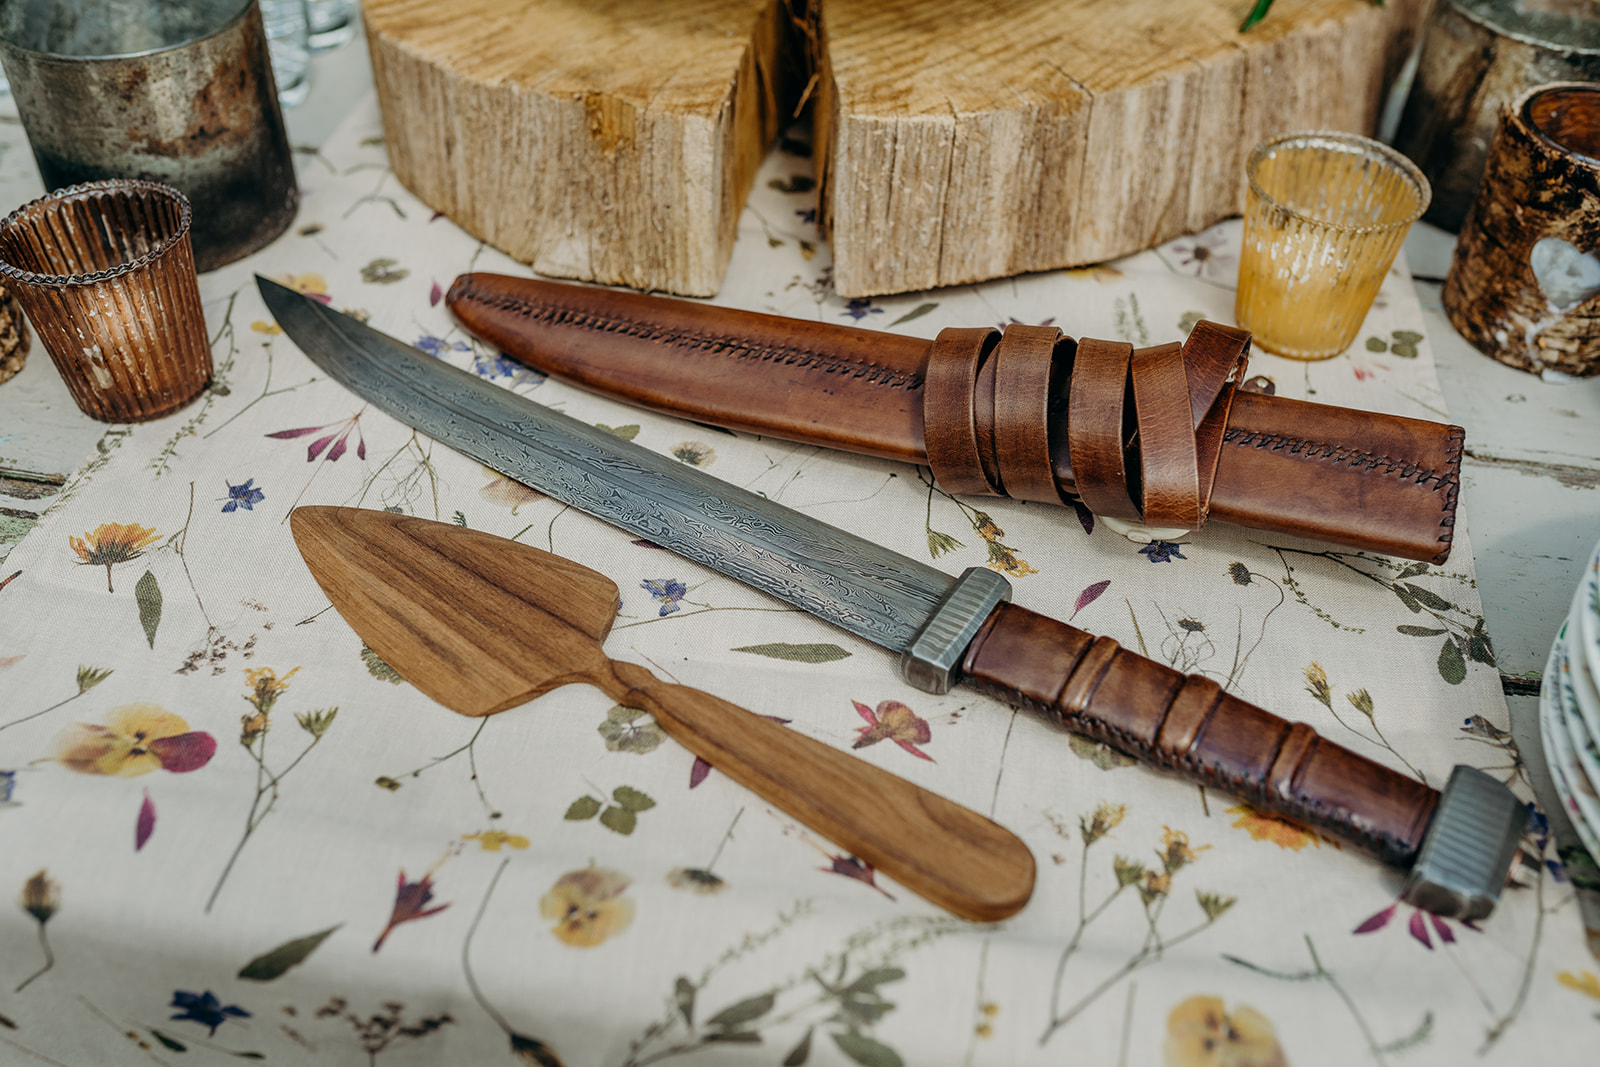 close up of hand made knife with leather sheath and handle by a wooden log slice on a pressed flower linen runner with rustic tealights